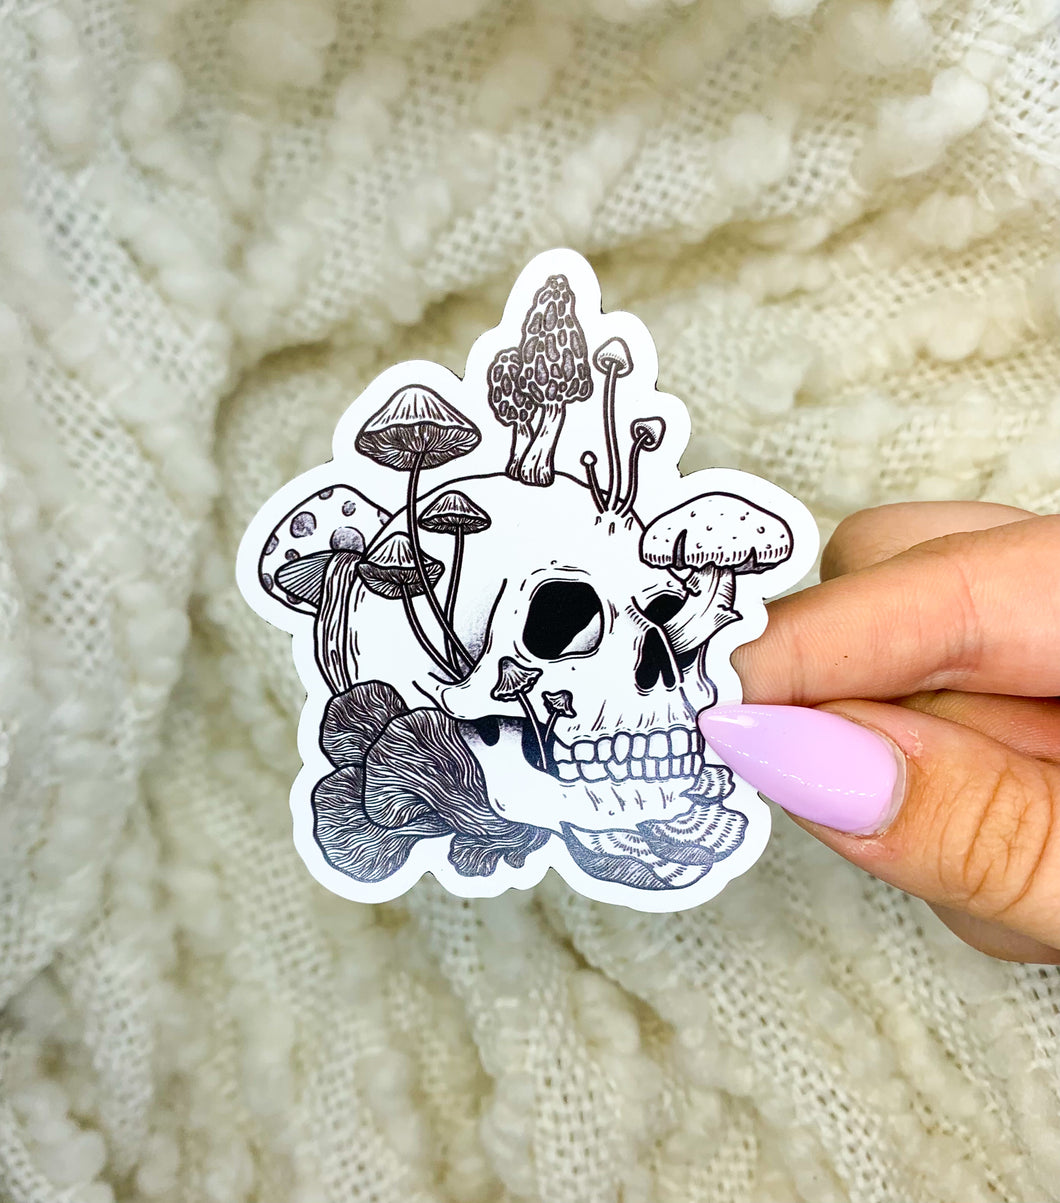 Spooky Shrooms 3x3 in. Magnet